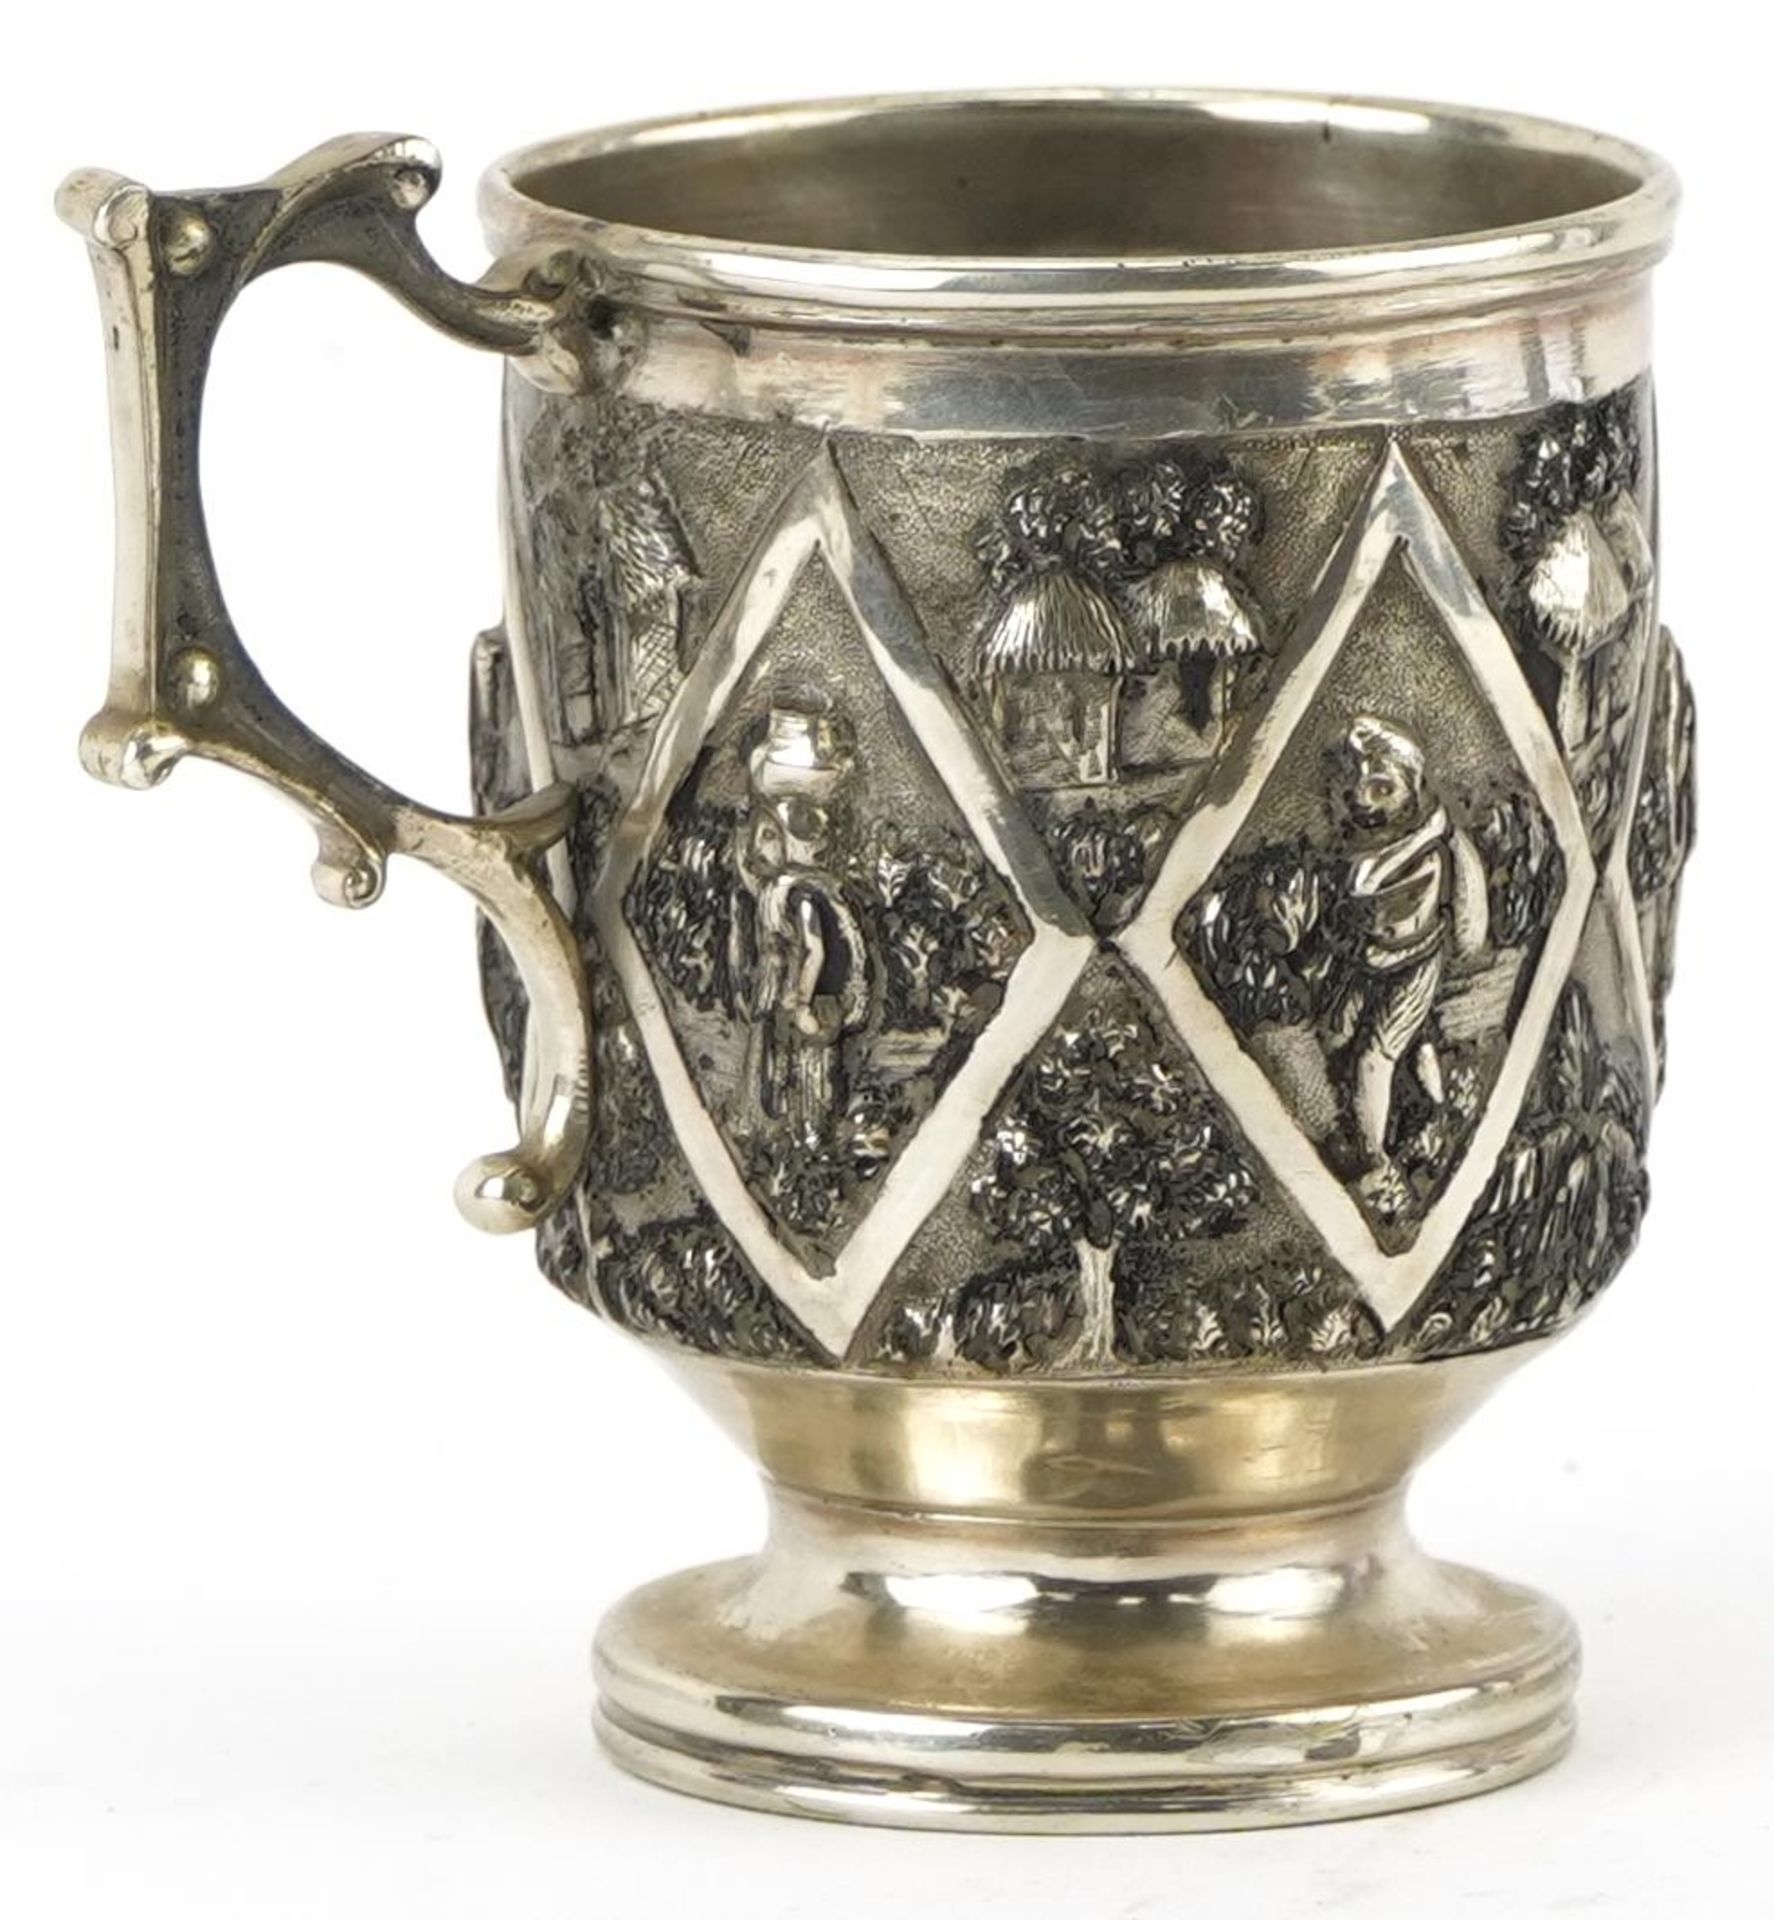 Grish Chunder of Calcutta, Indian unmarked silver christening tankard embossed with villagers and - Image 2 of 4